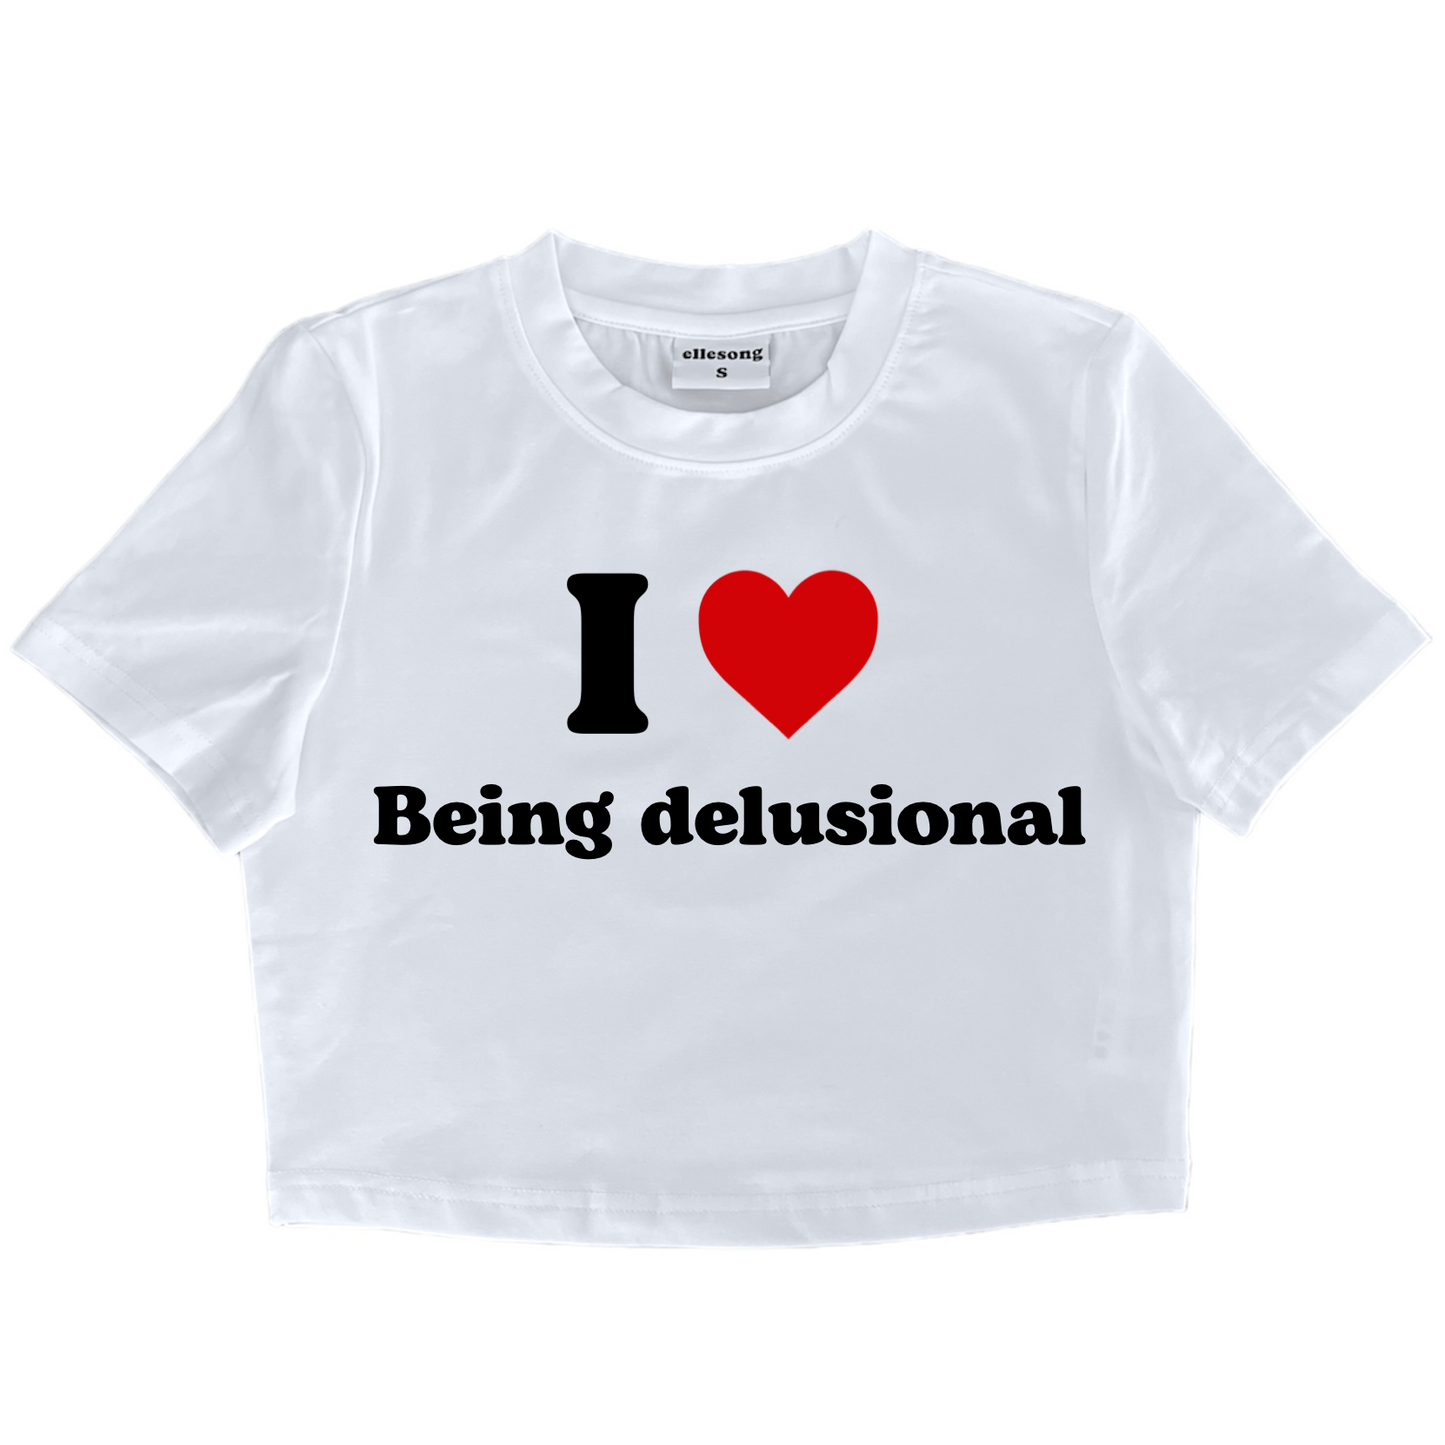 I Heart Being Delusional Baby Tee